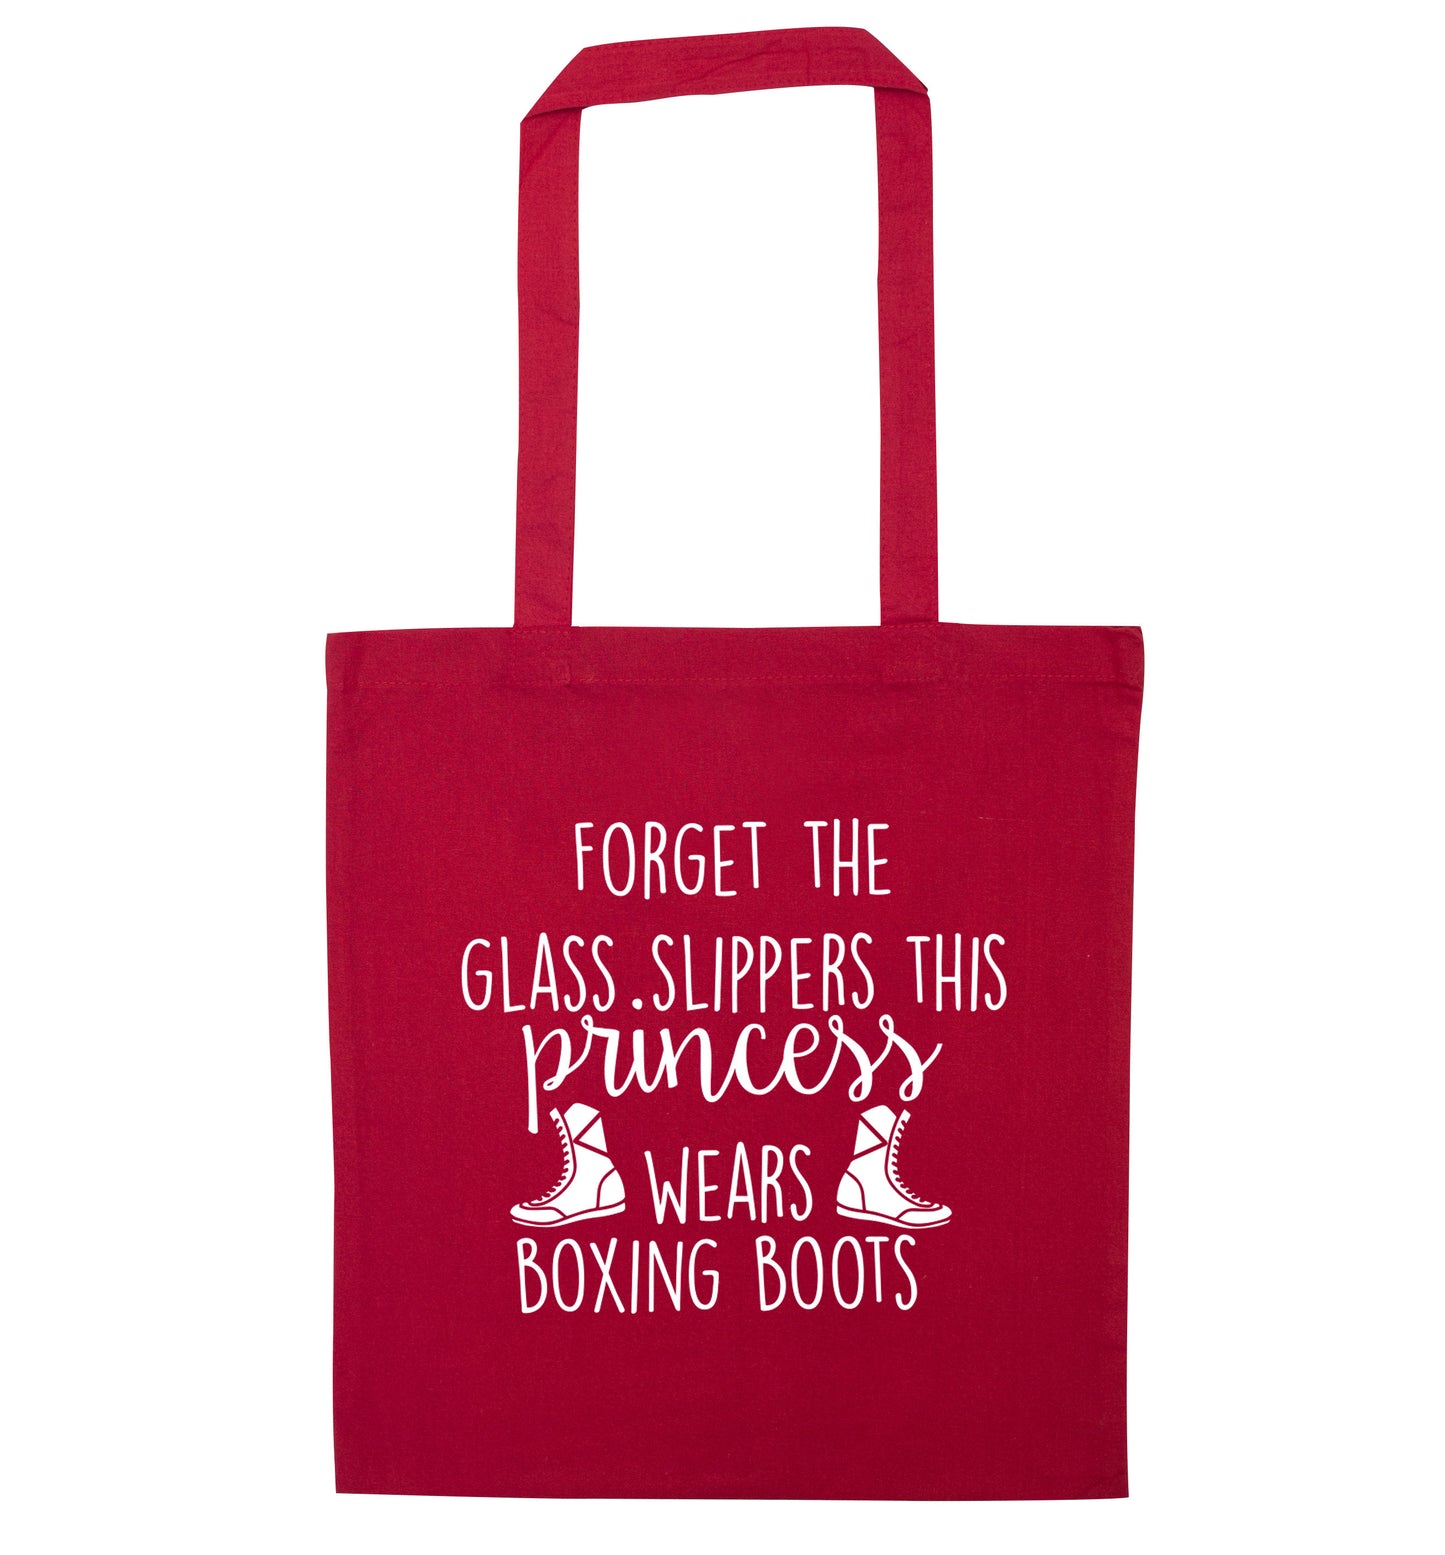 Forget the glass slippers this princess wears boxing boots red tote bag